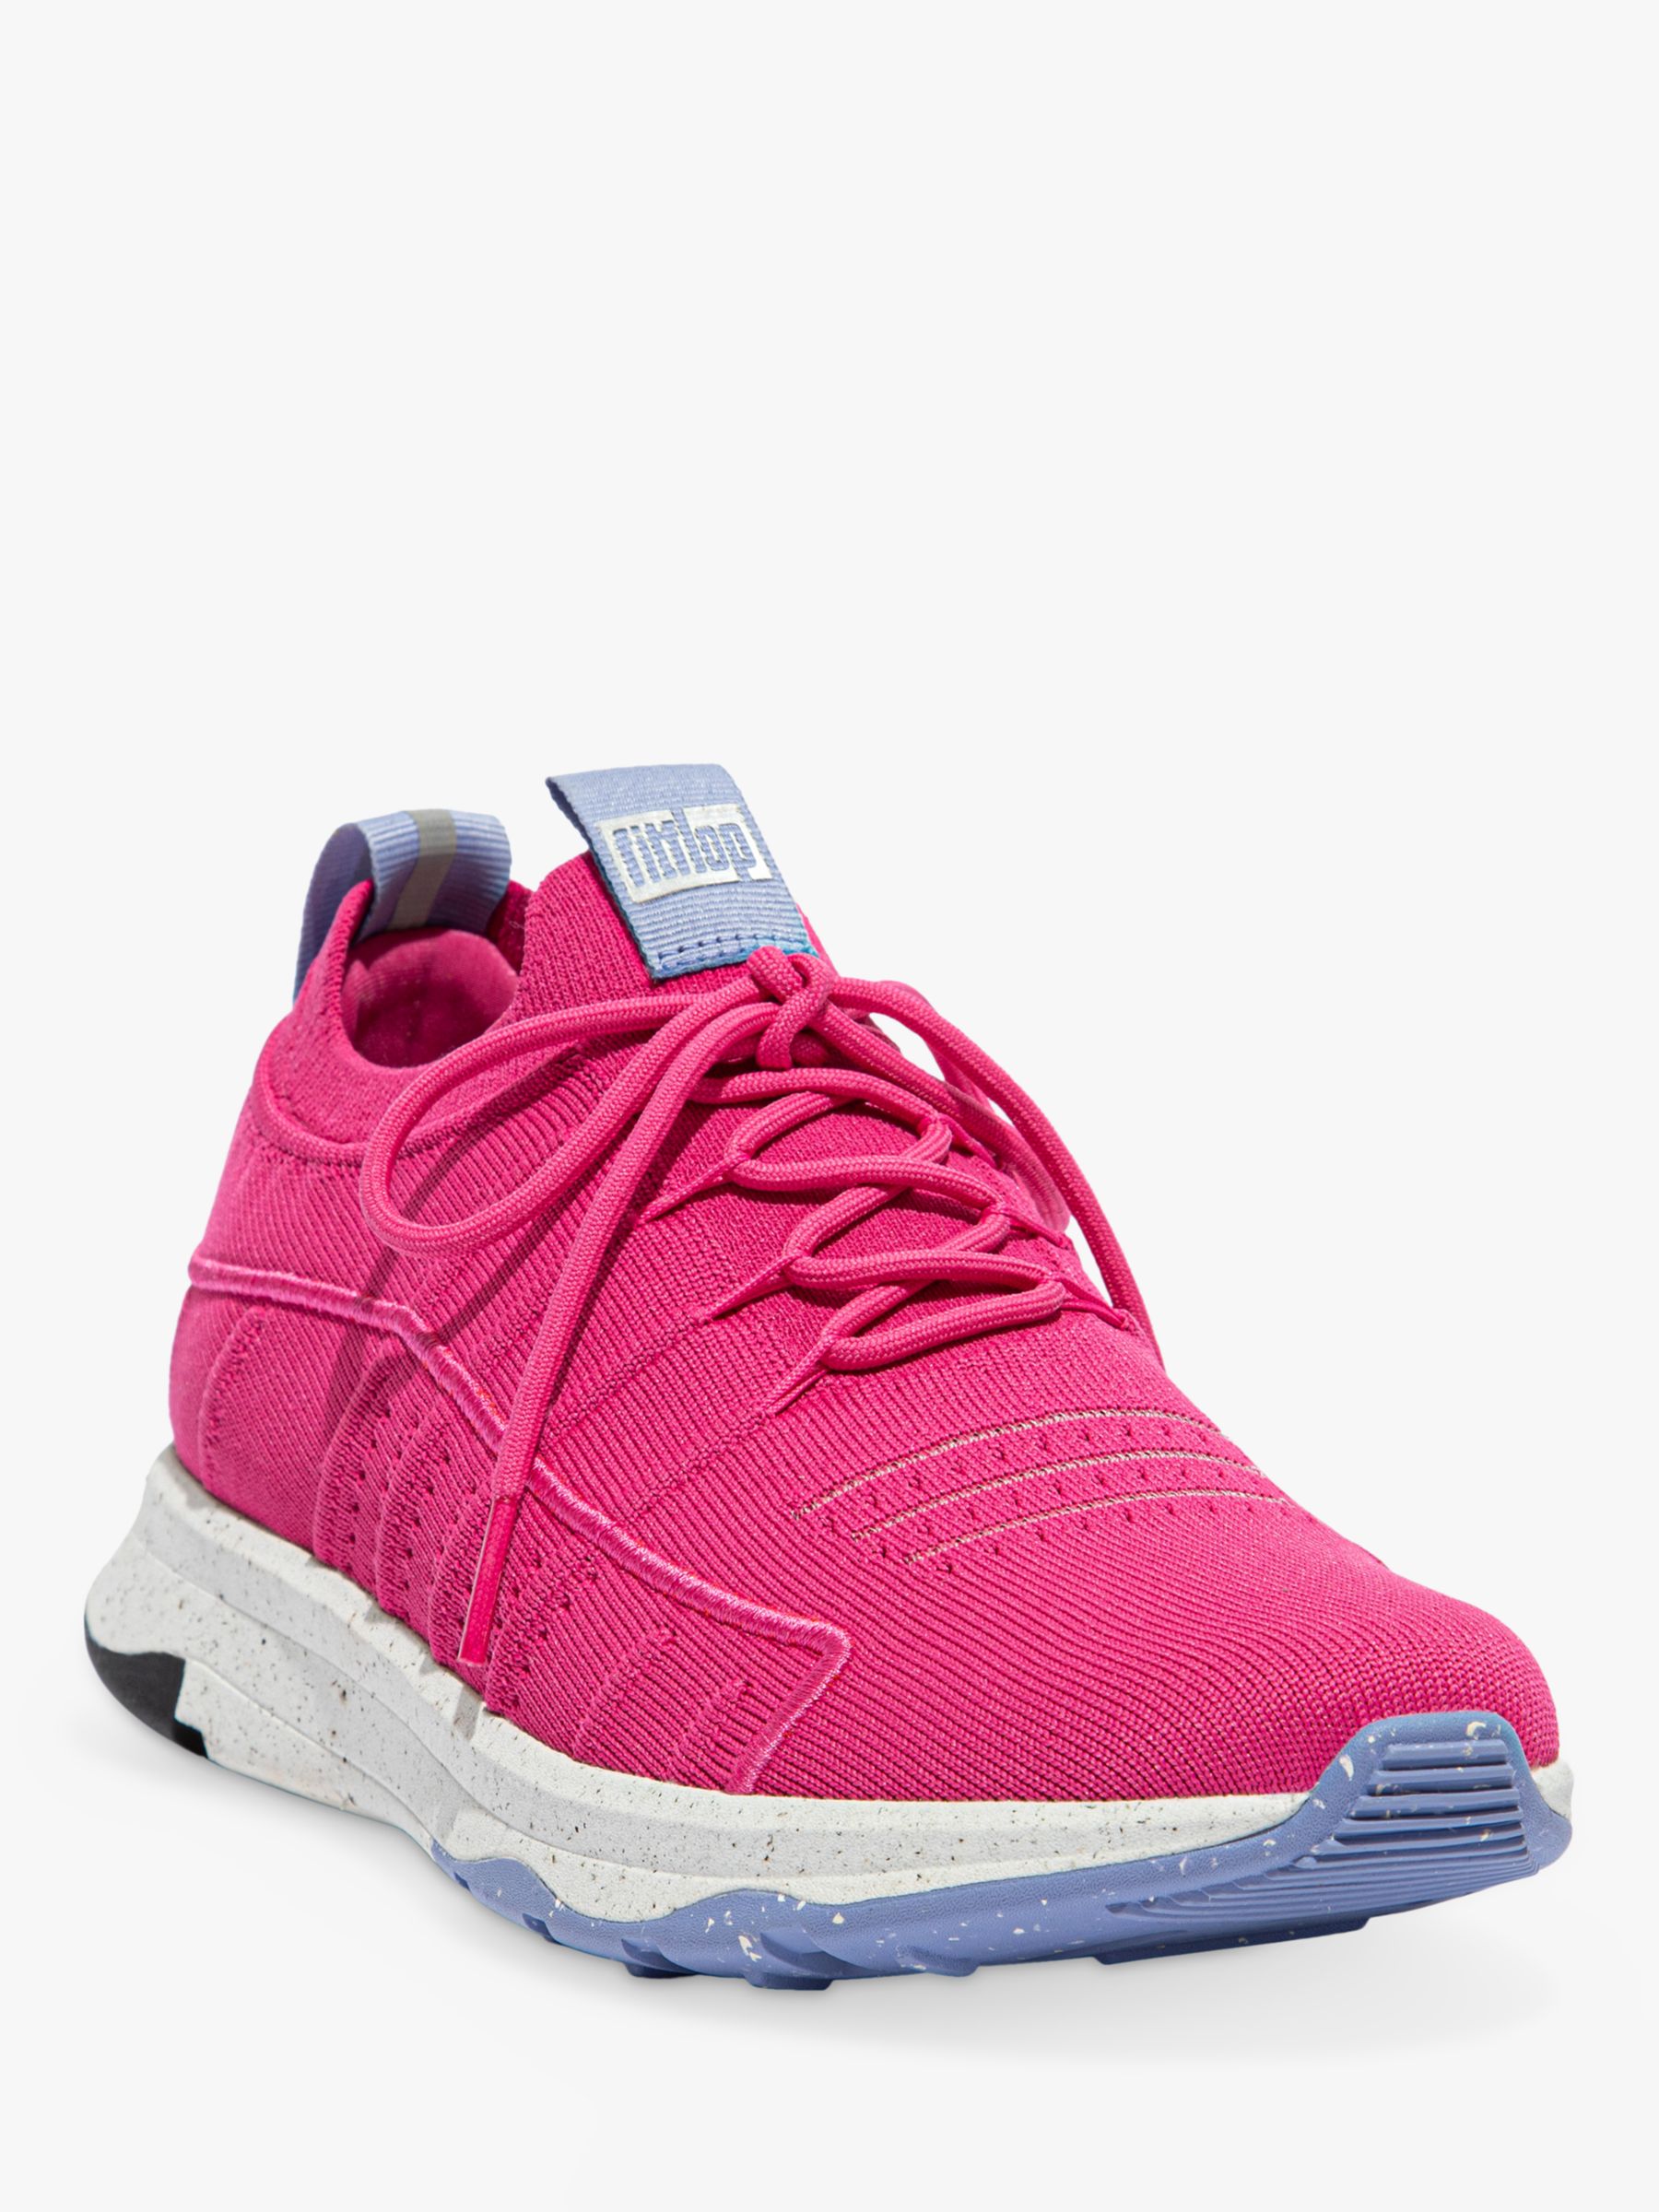 FitFlop Vitamin FF Knit Sports Trainers, Fuchsia at John Lewis & Partners